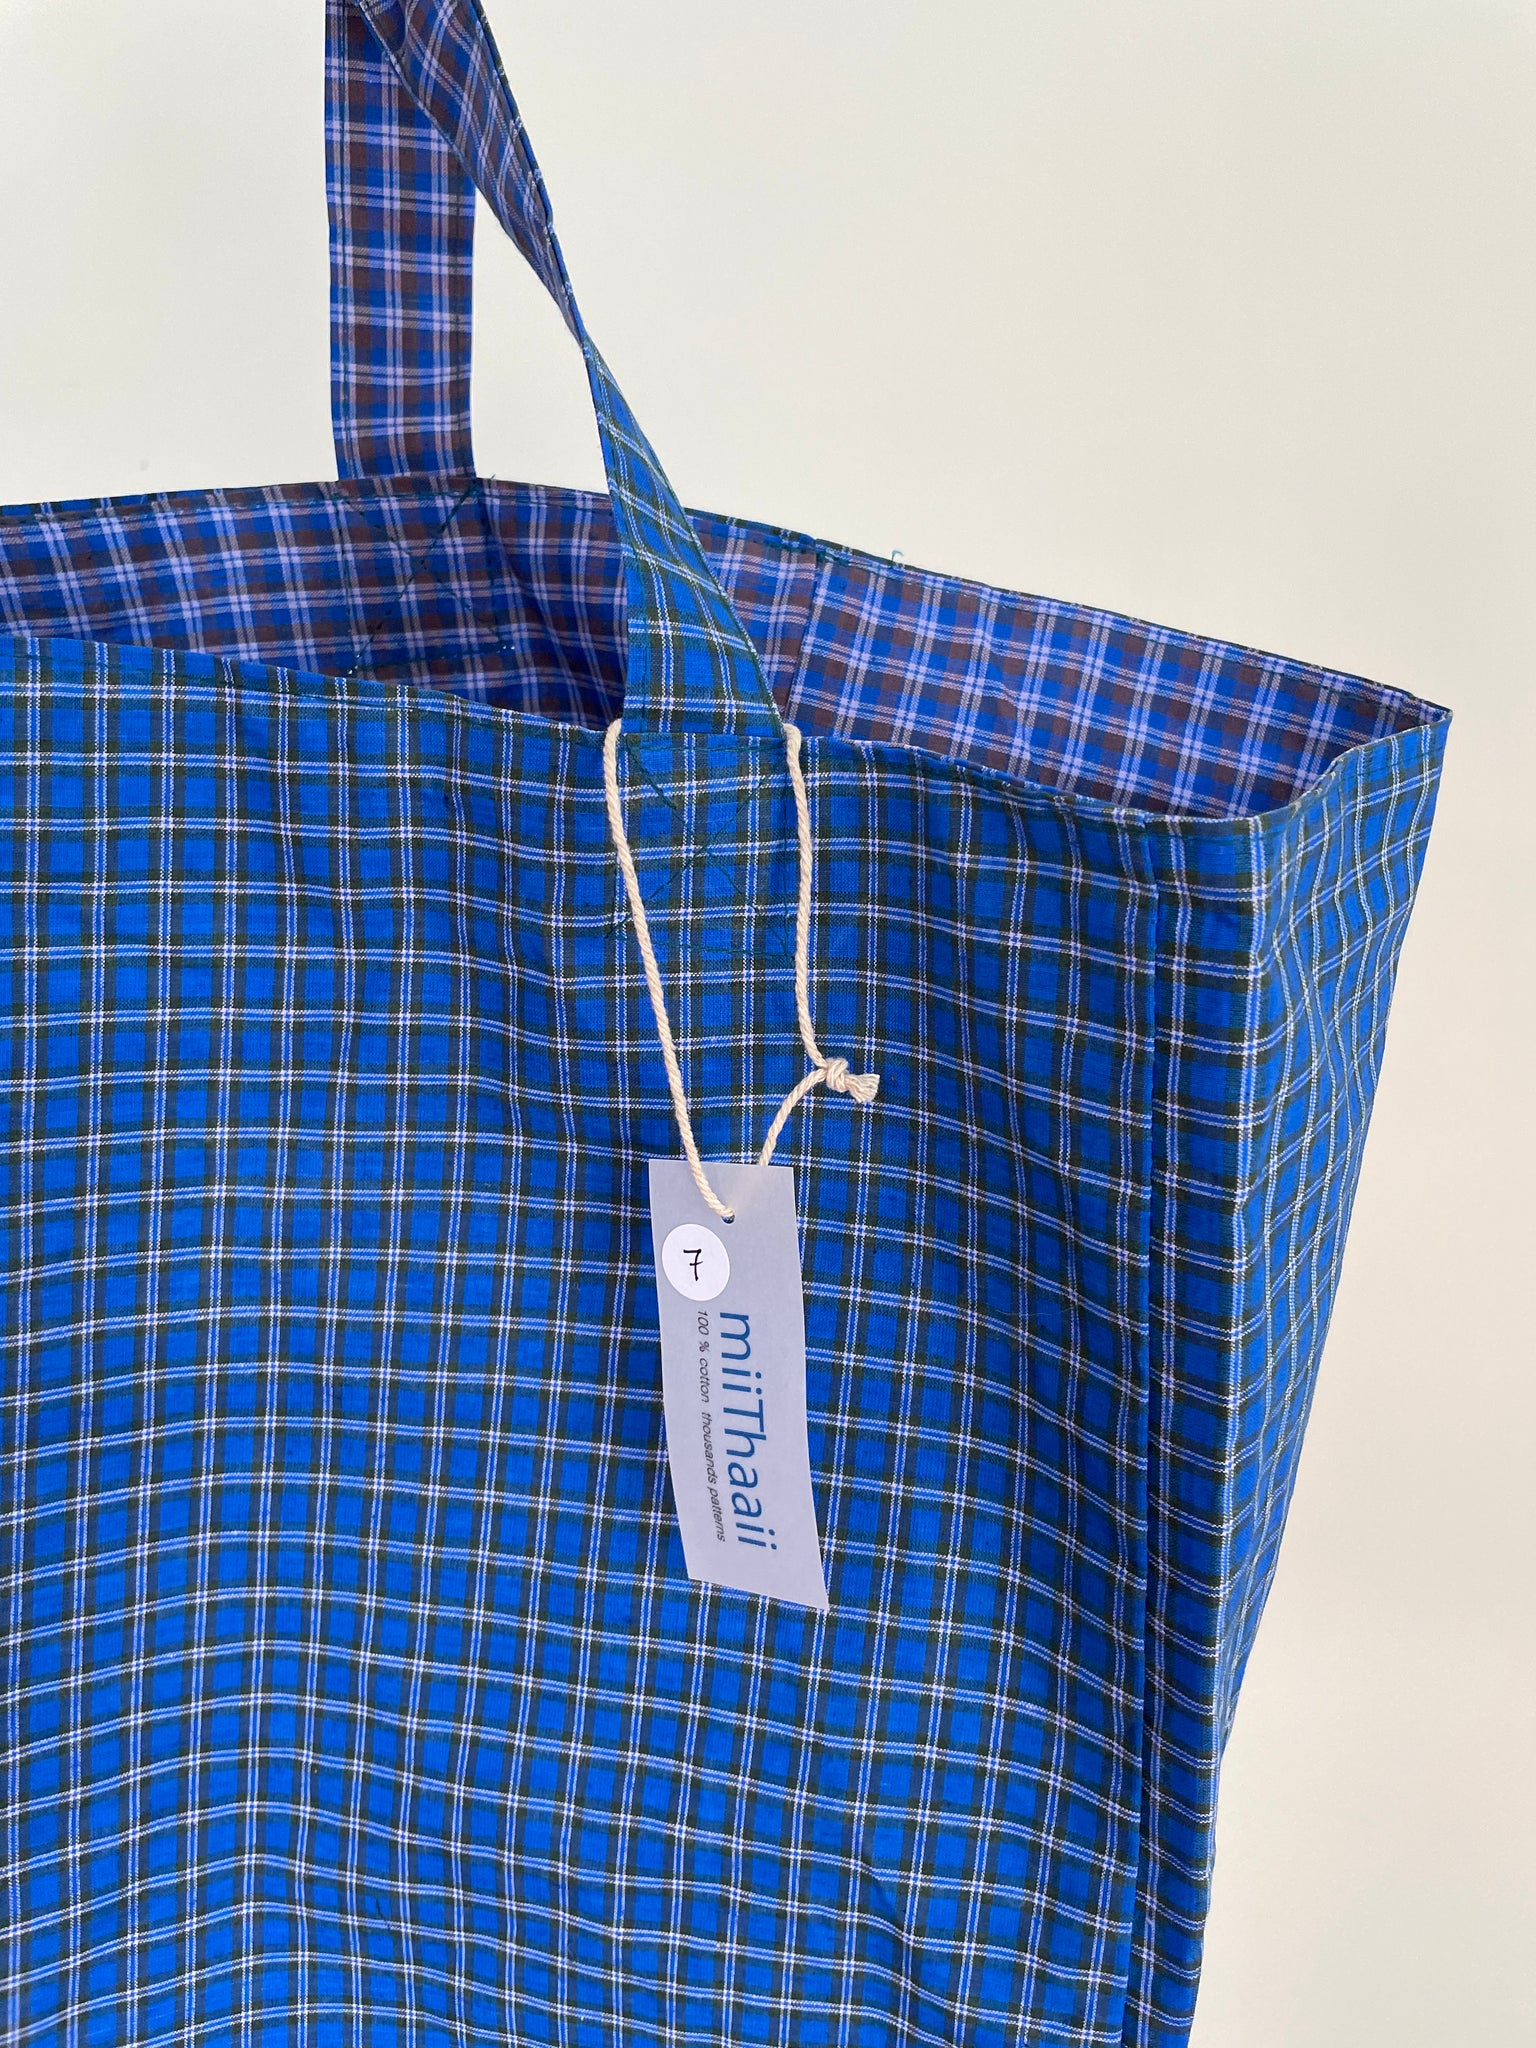 Reversible Cotton Tote Bag (assorted blue checks), by MiiThaaii